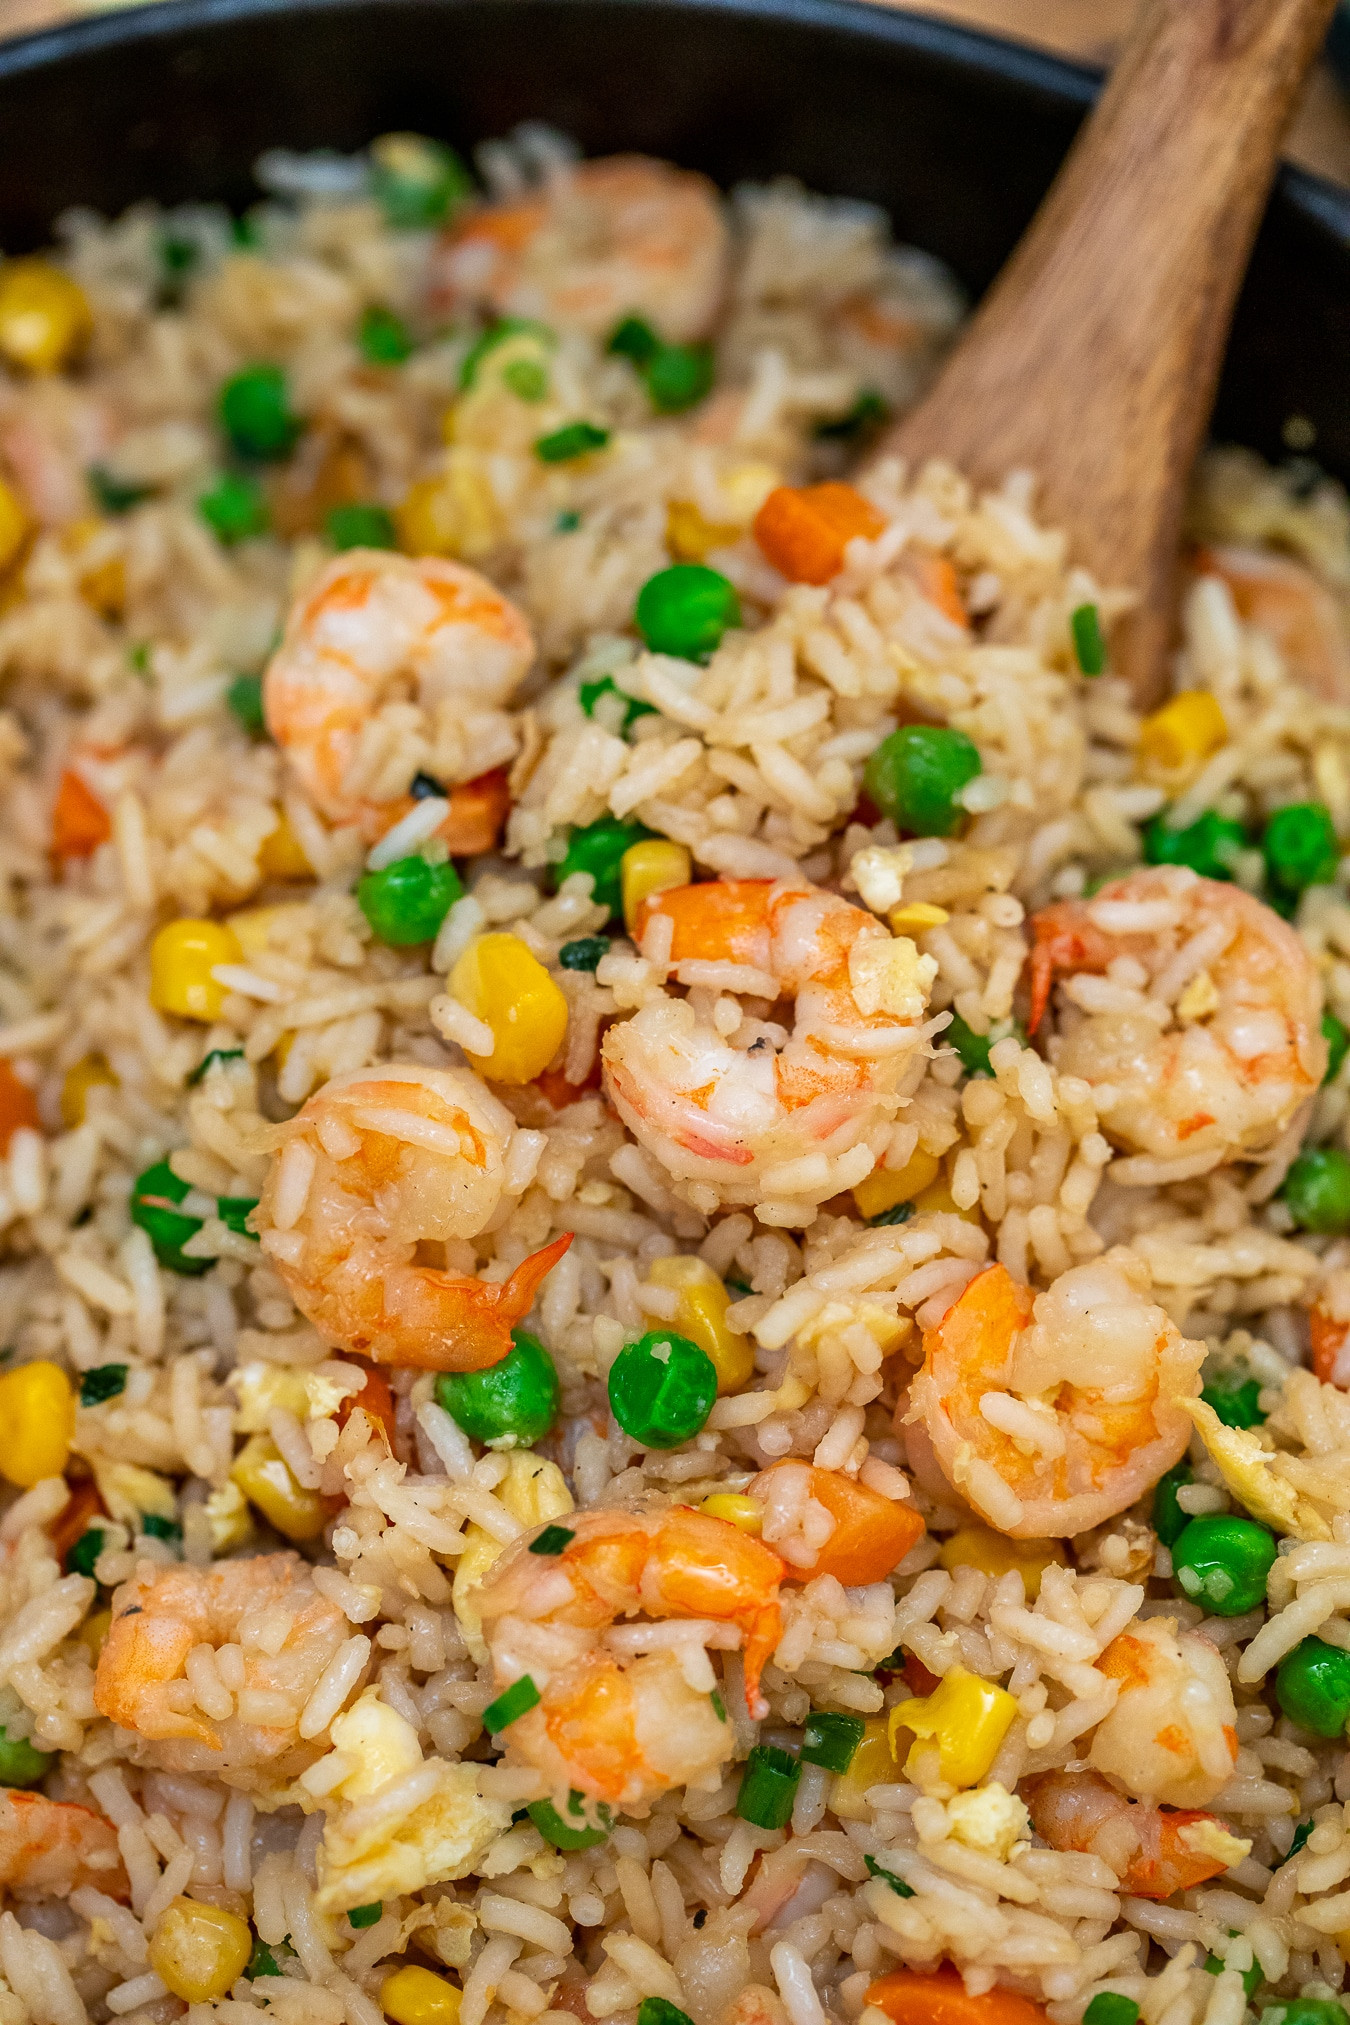 Shrimp Fried Rice Ingredients Inspirational Shrimp Fried Rice Recipe [video] Sweet and Savory Meals